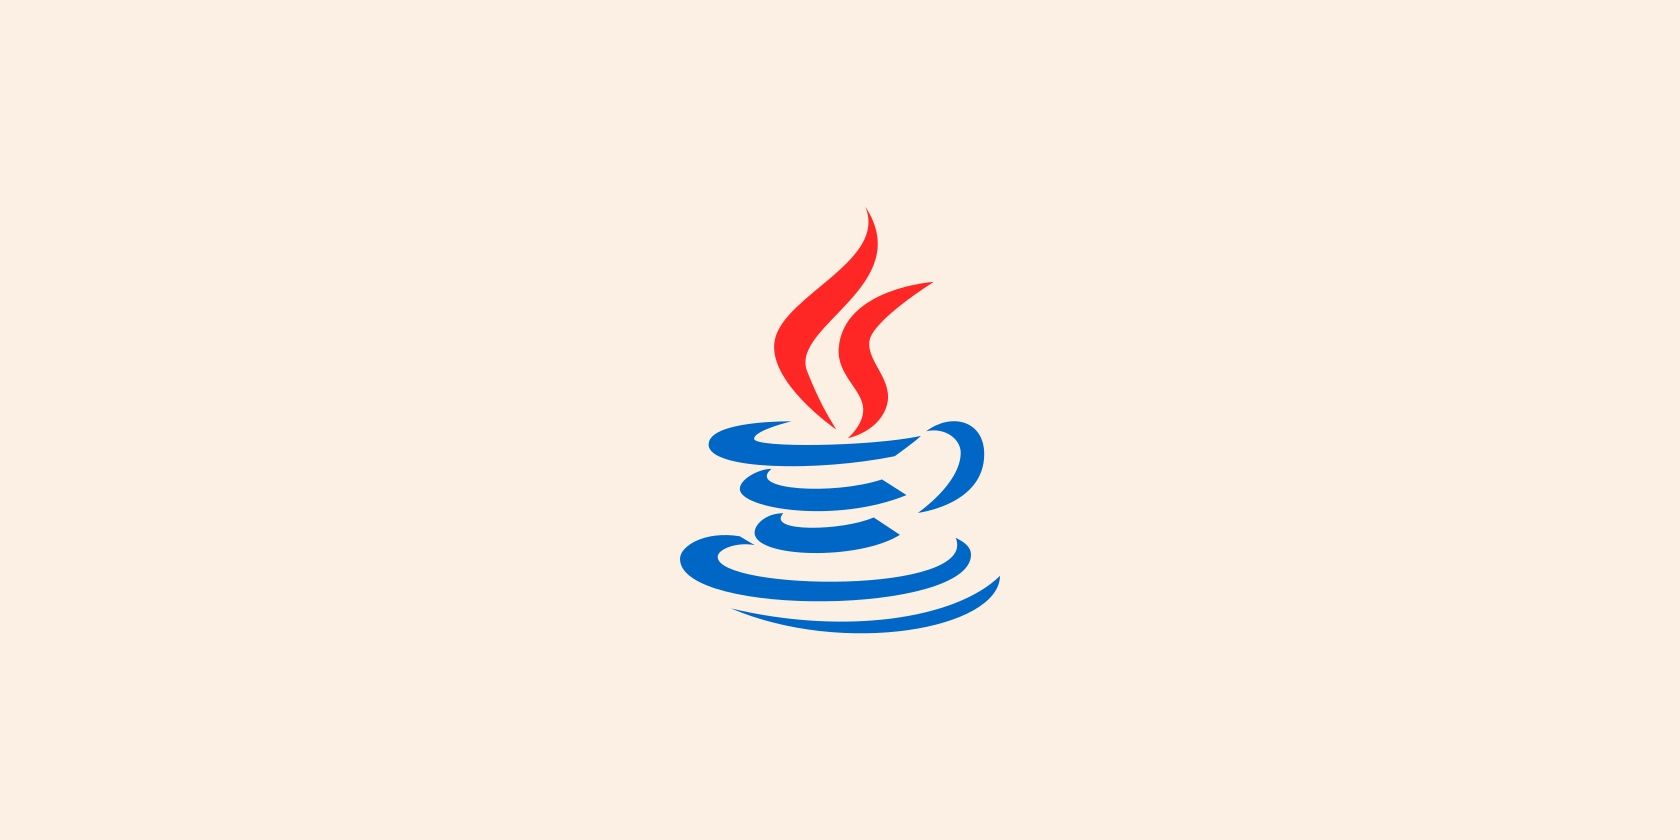 A Java logo against a beige background